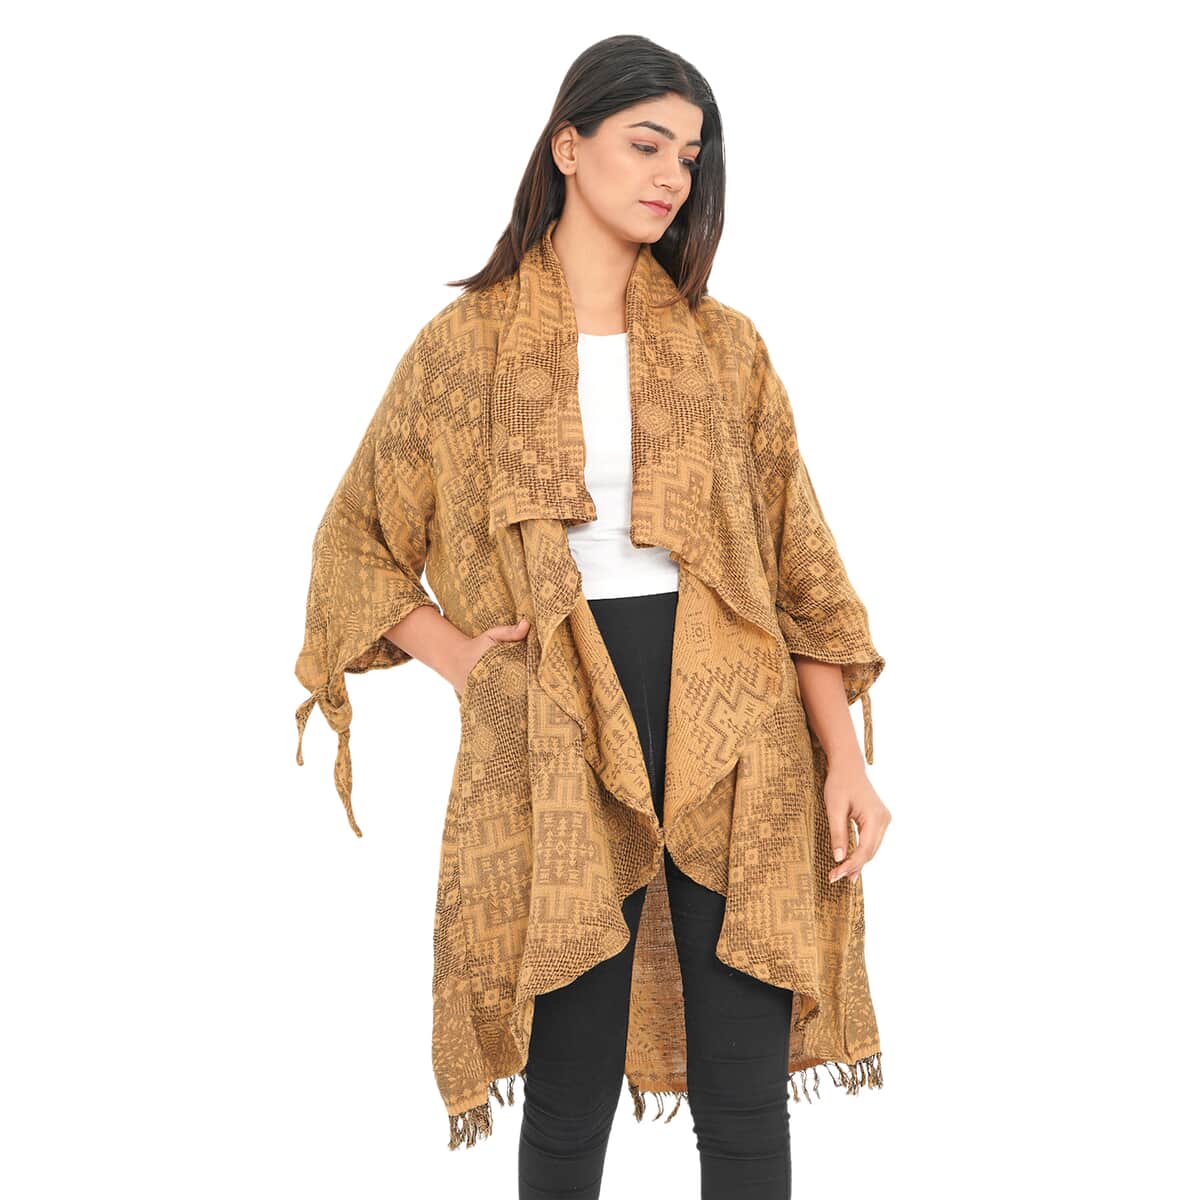 TAMSY Gold 100% Cotton Double Layer Jacquard Waterfall Front Cardigan - One Size Missy (35"x24") image number 2